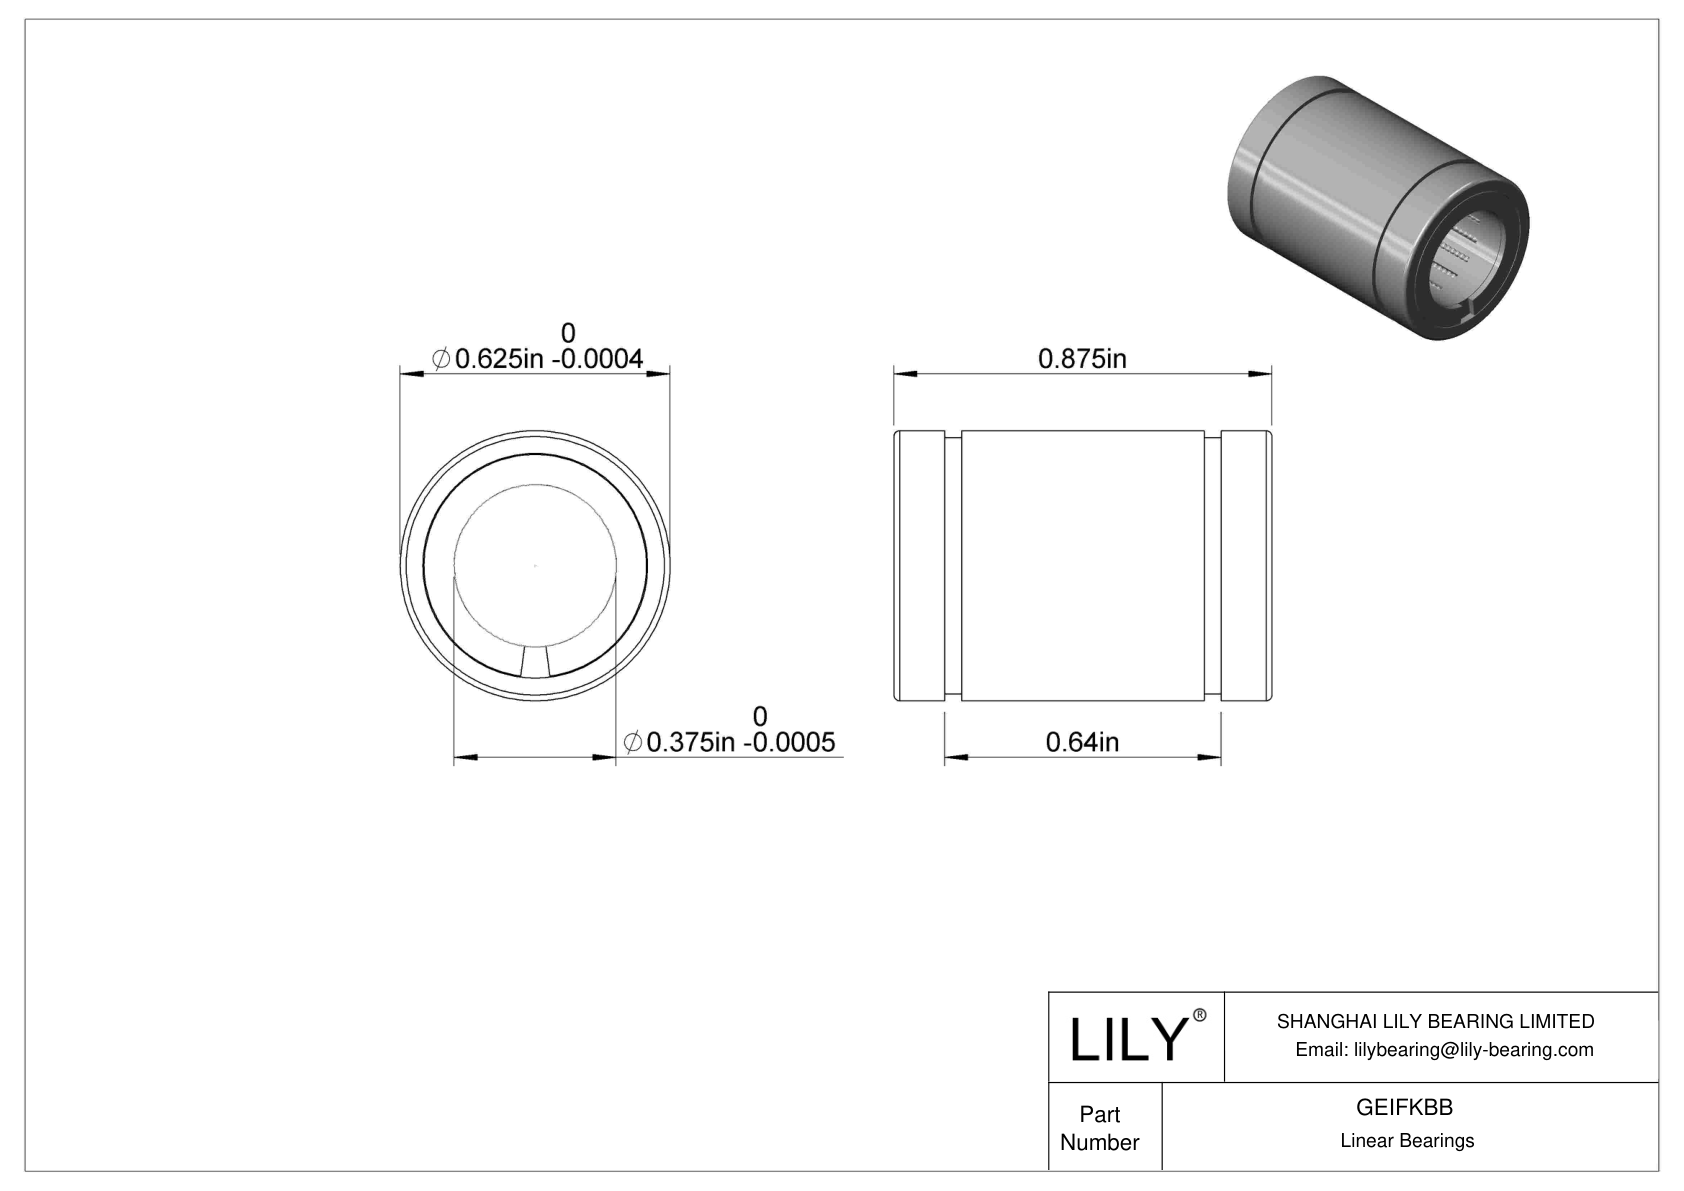 GEIFKBB Linear and Rotary Ball Bearings cad drawing